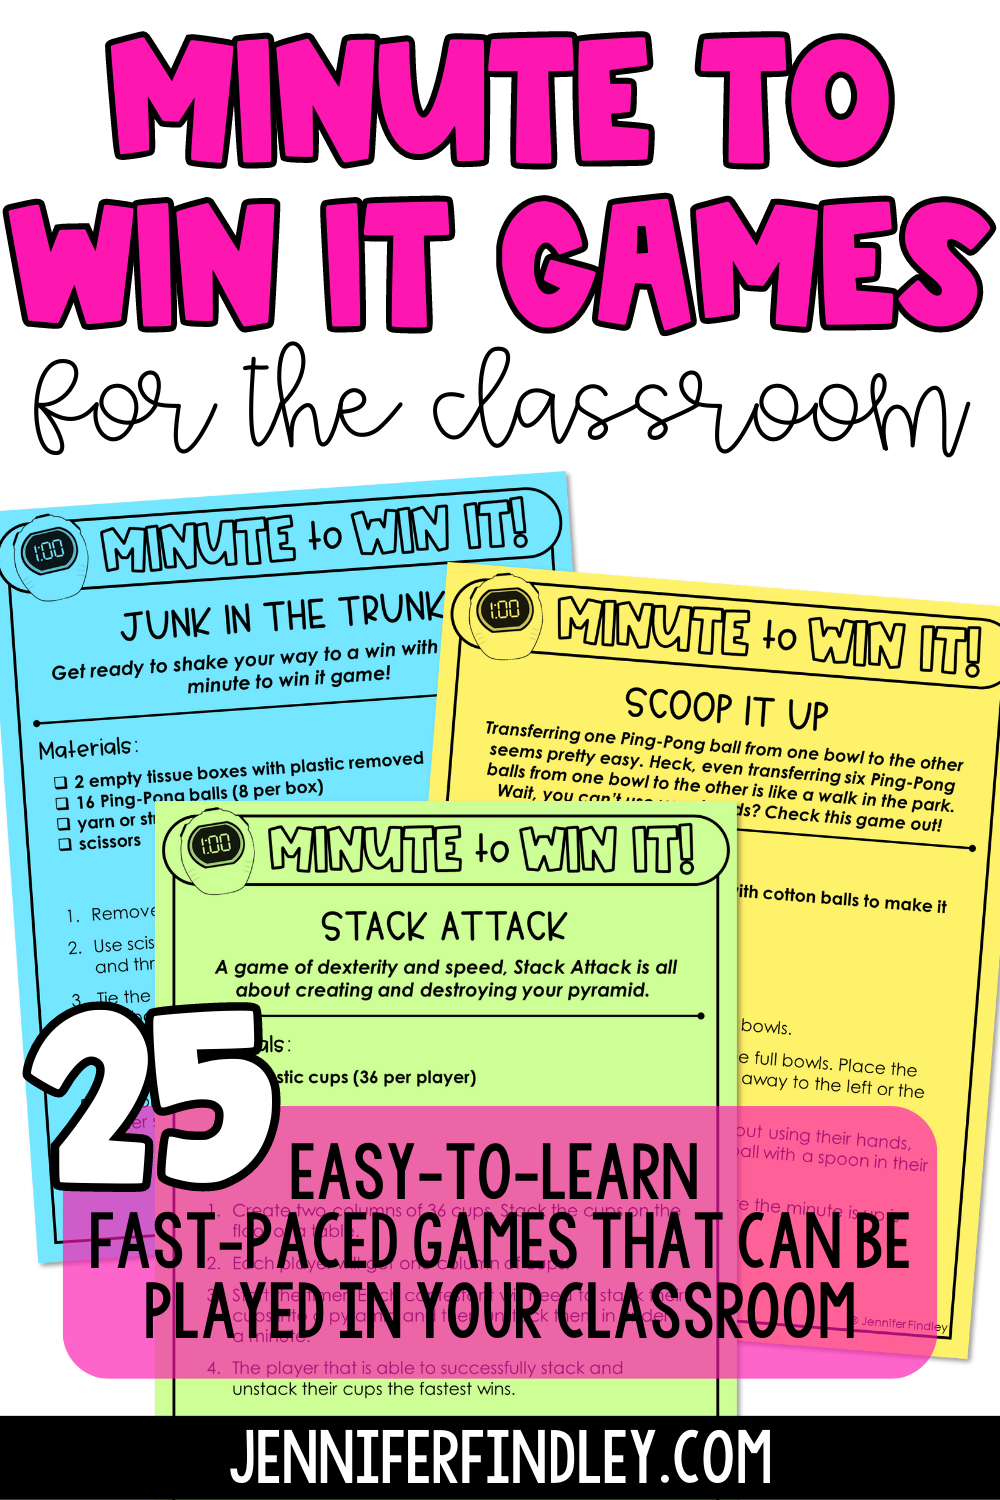 Minute-to-Win-It games can easily be incorporated into the classroom for instant engagement! Check out this blog post for ideas and free activity directions!